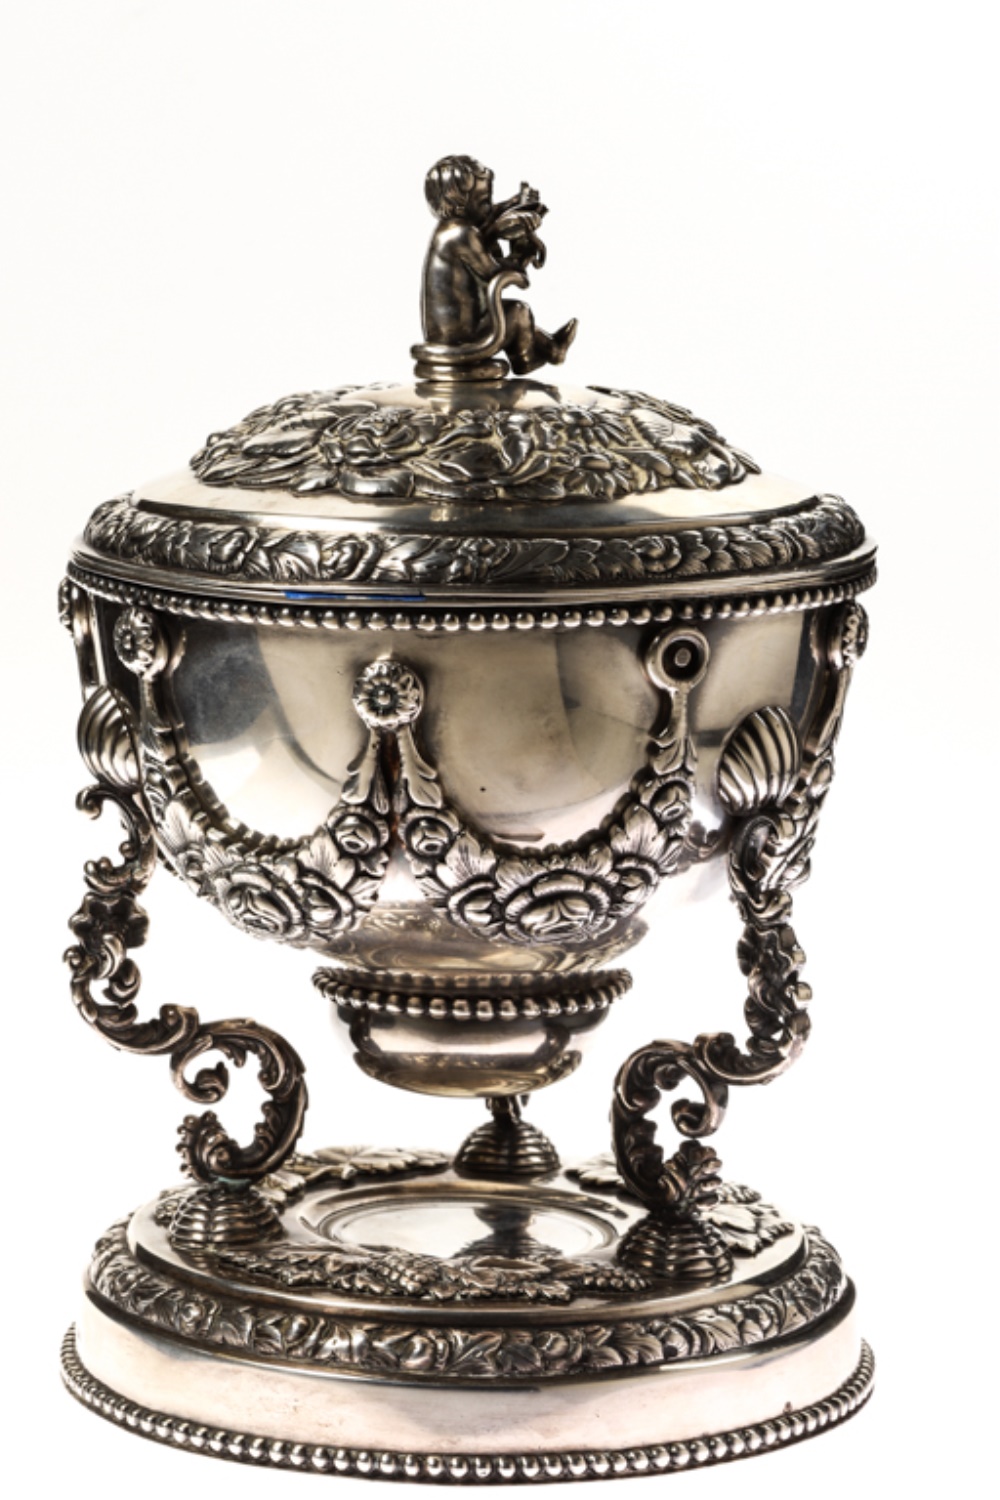 Rear View, Covered Historical Silver Presentation Cup, From John McInnis Auctioneers Two Day May, 2019 Estates Auction.